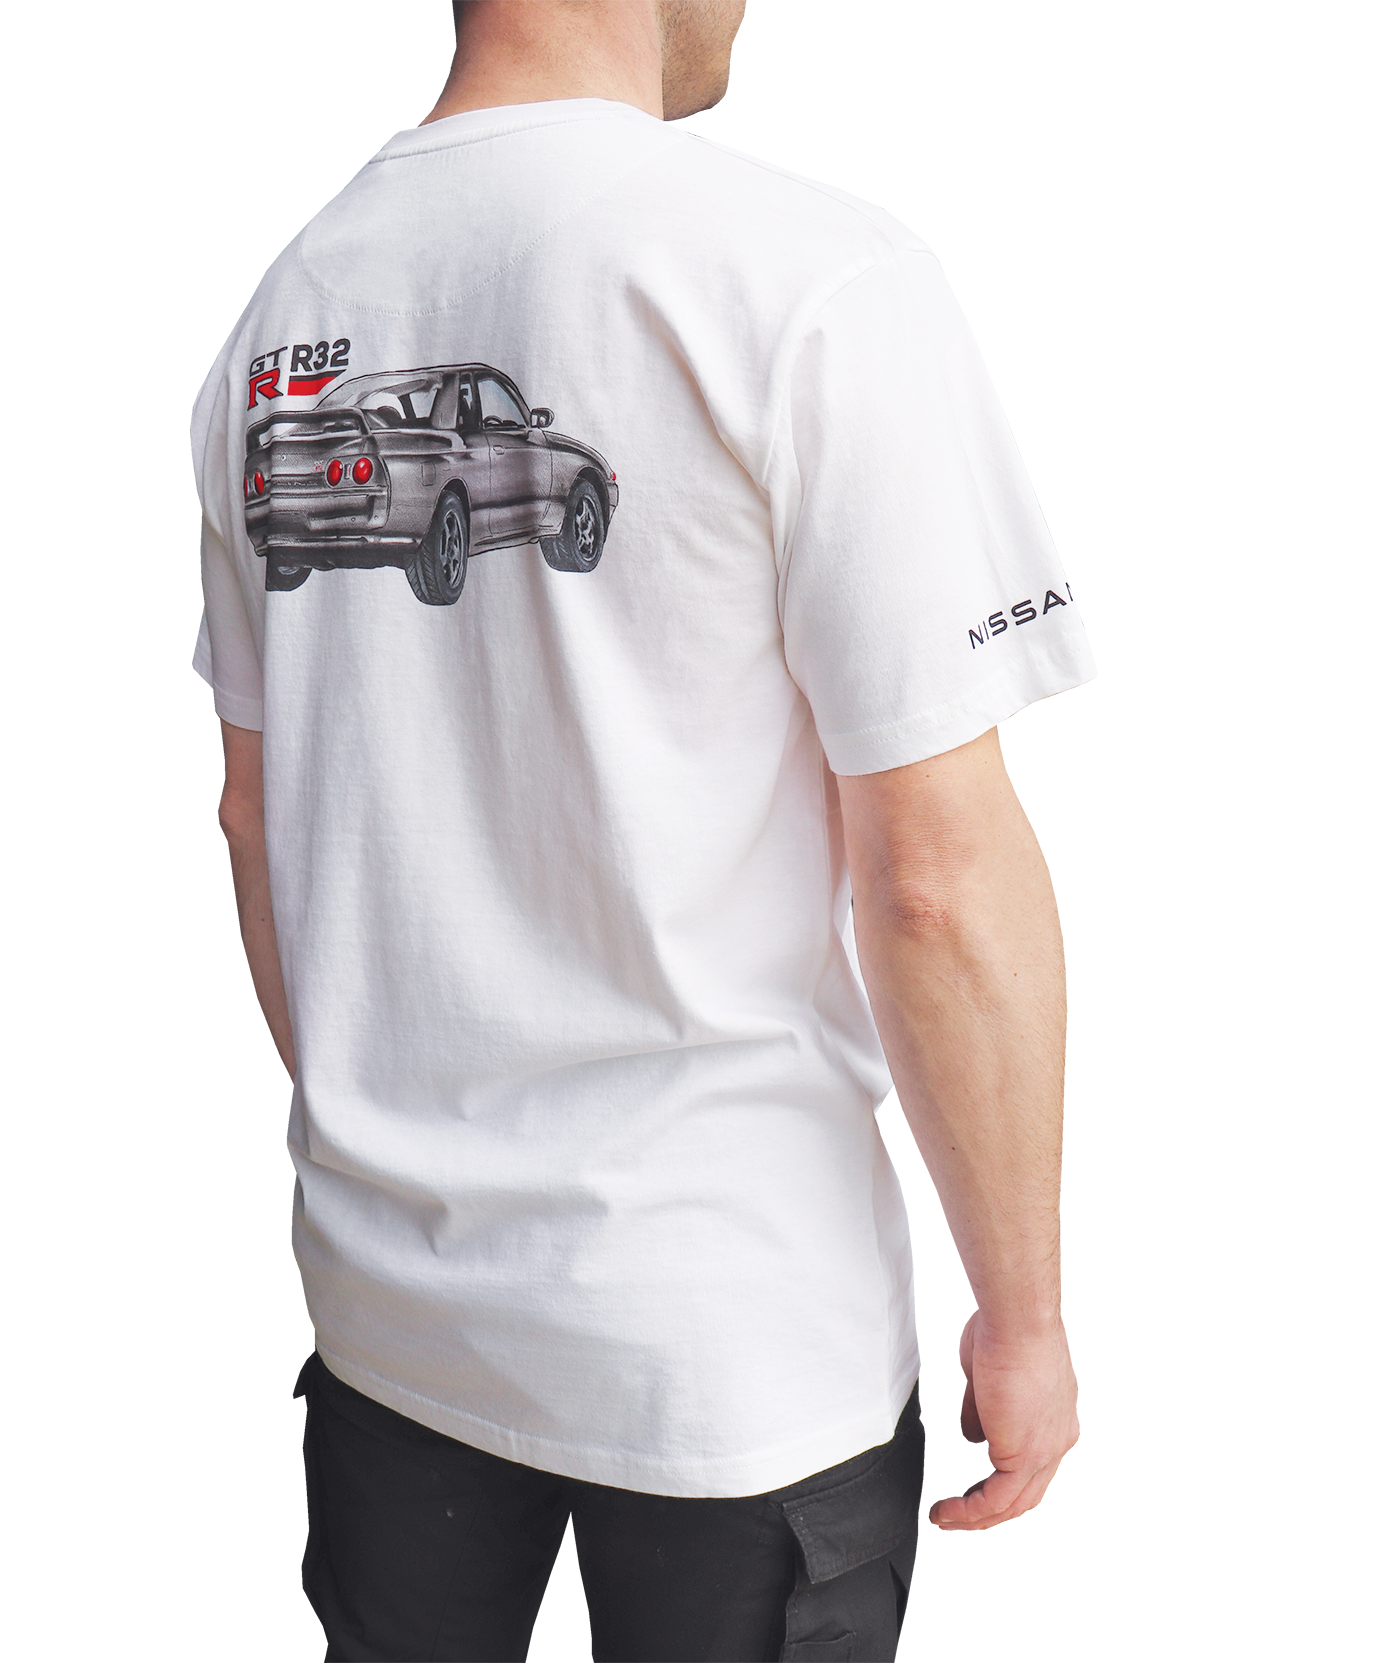 Limited Edition Tee - GTR R32 - White